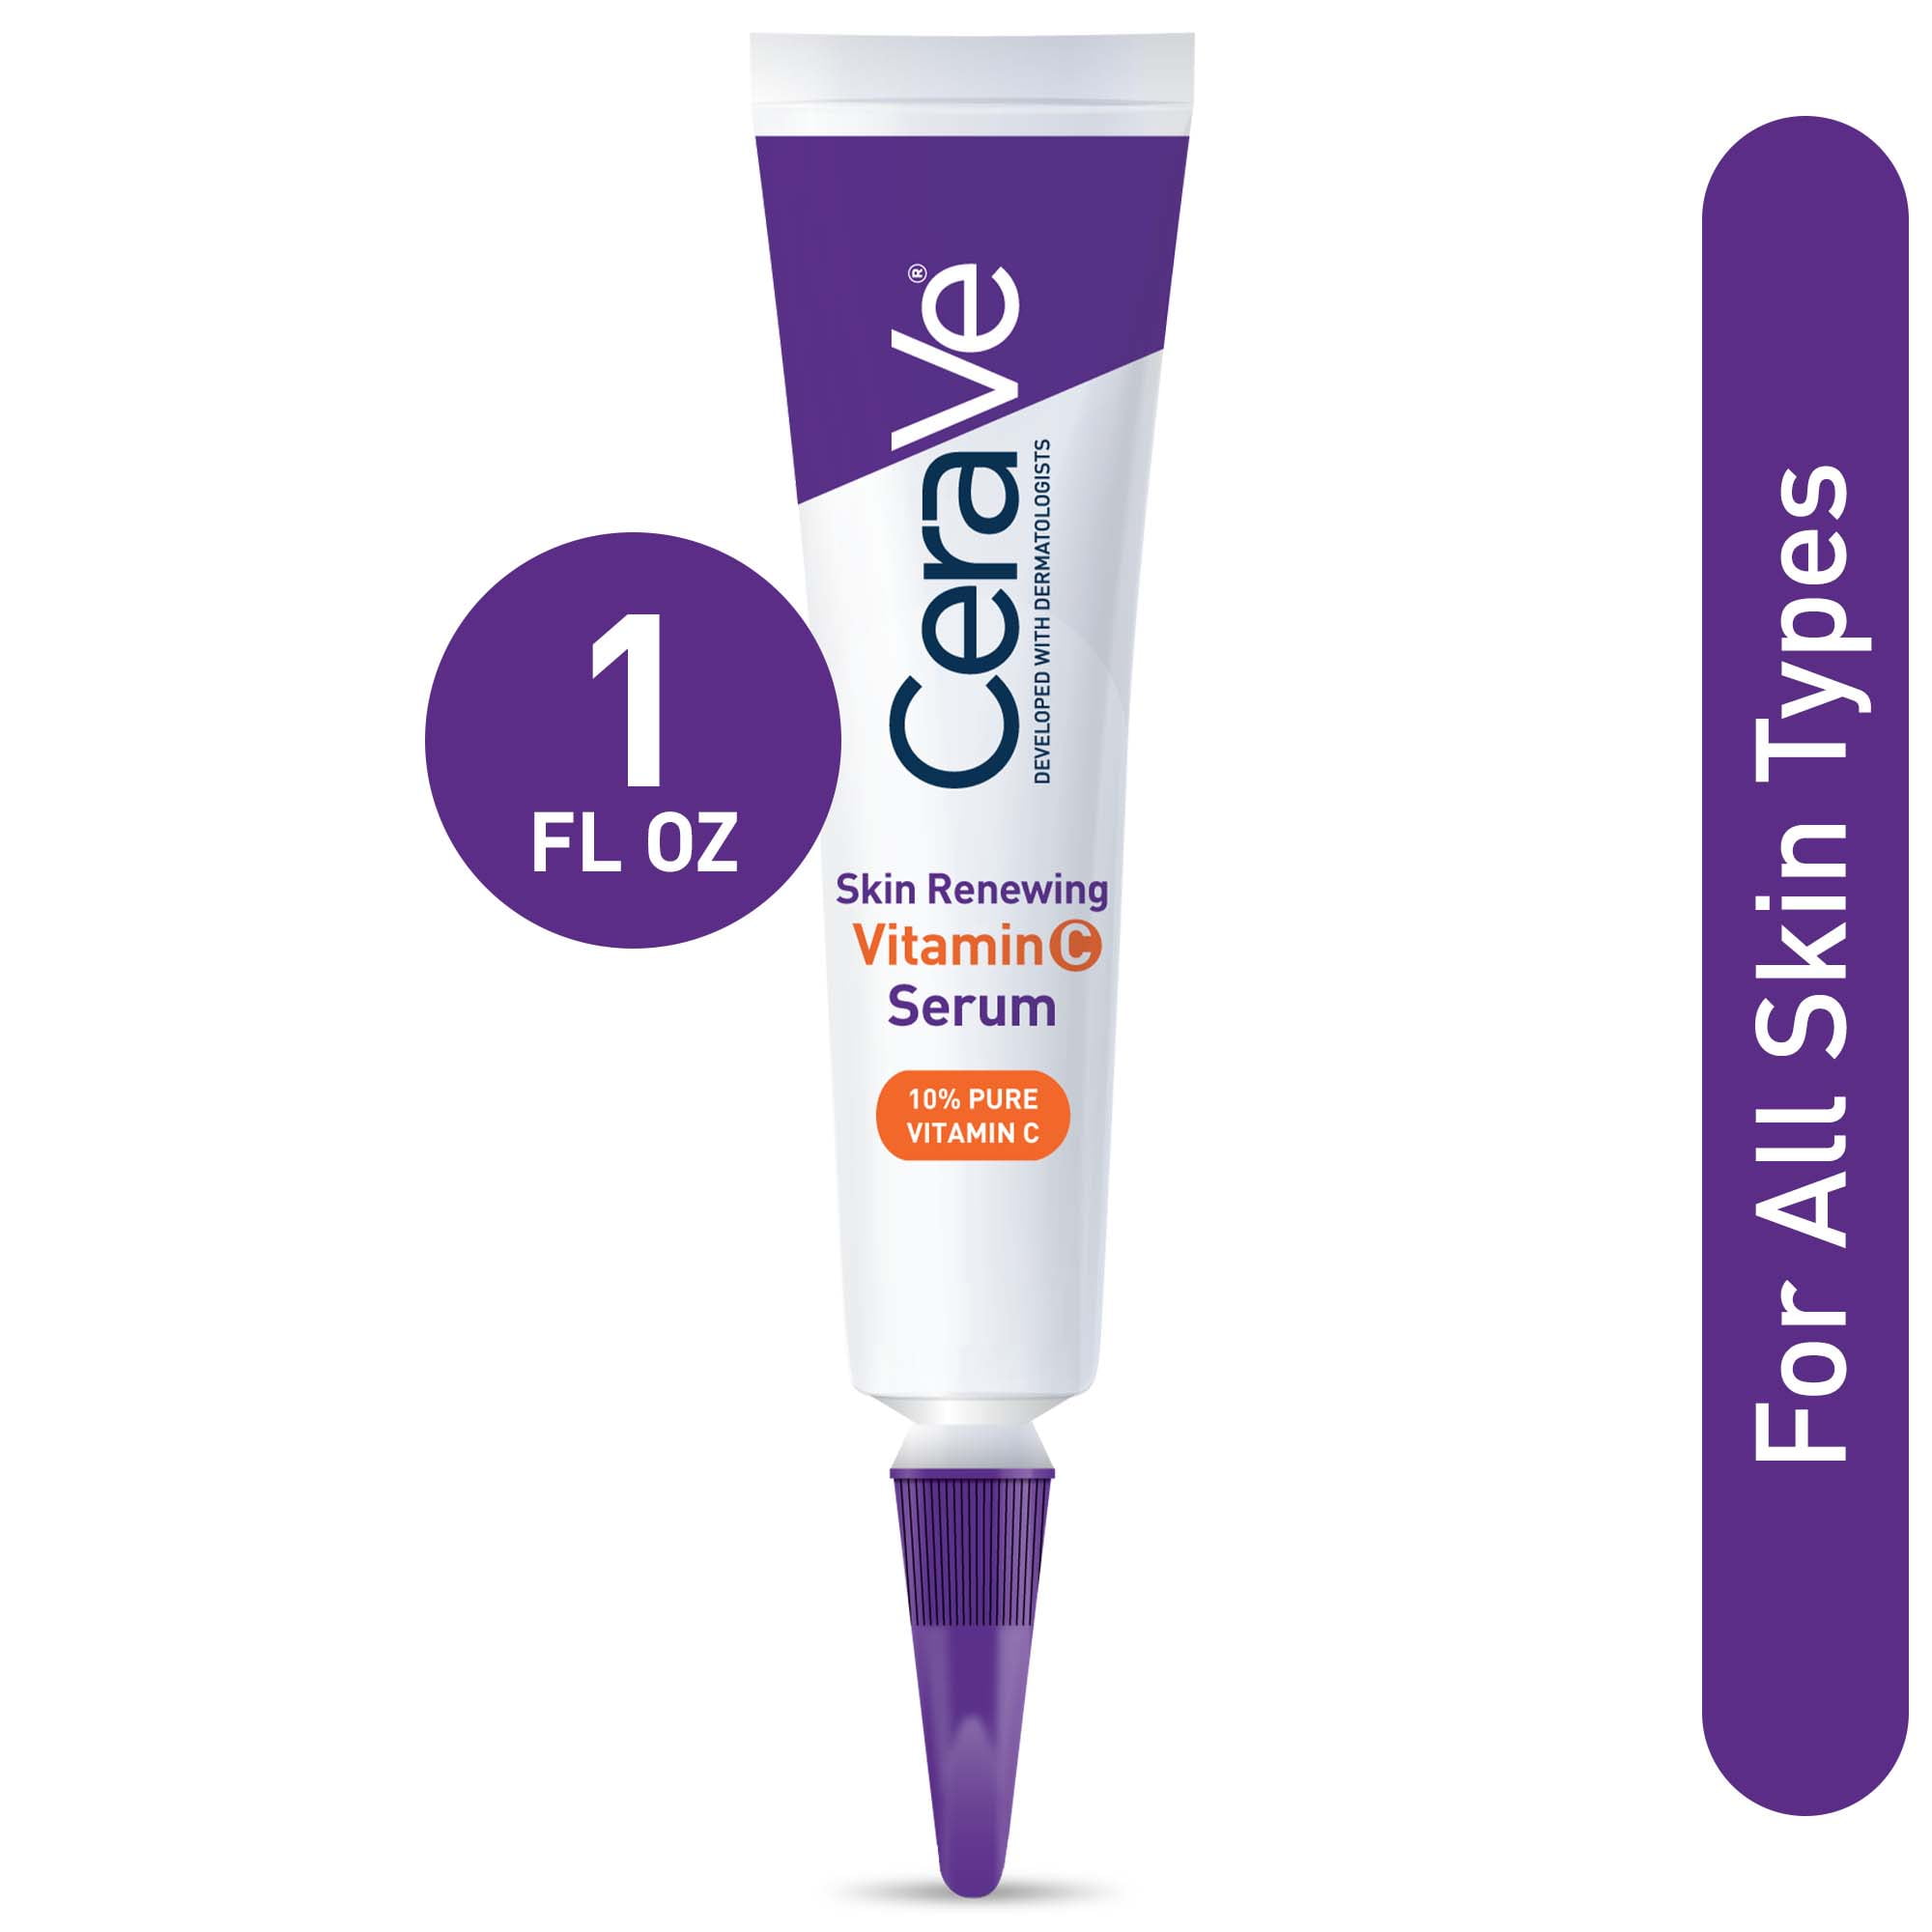 CeraVe Vitamin C Serum for Face with Hyaluronic Acid, Skin Brightening and Fragrance-Free Serum, 1 fl oz